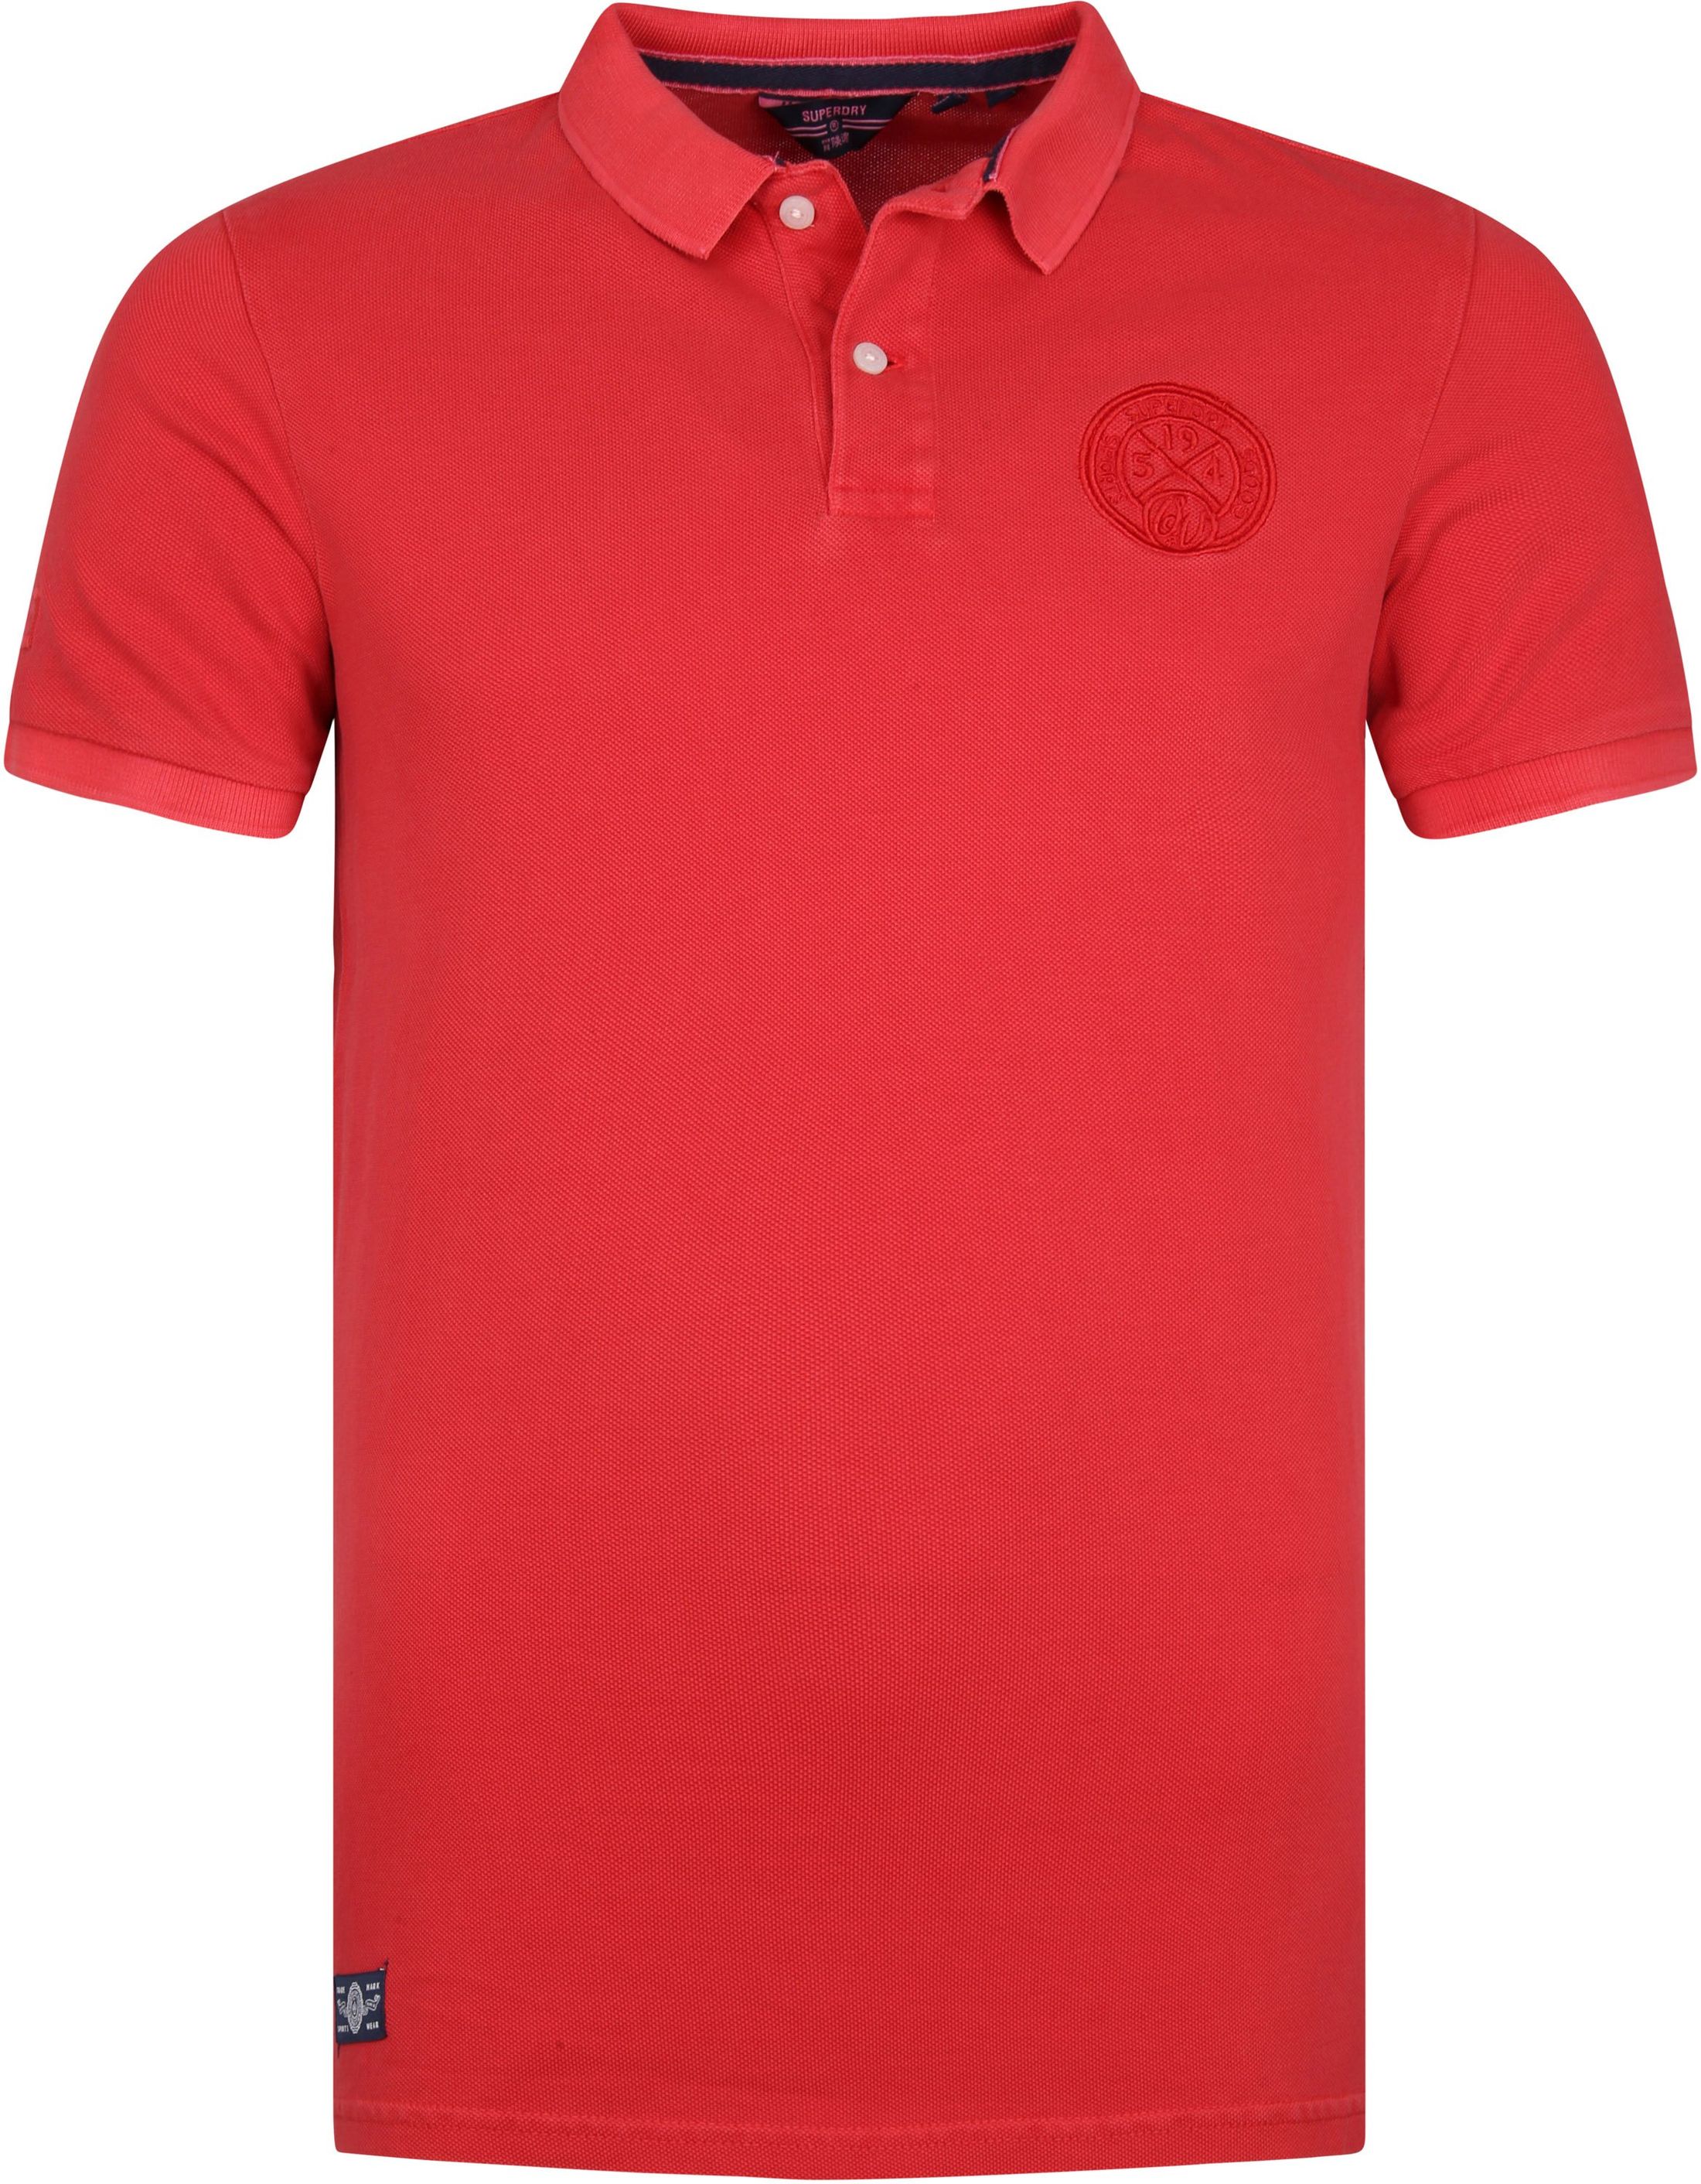 Superdry Classic Polo Shirt Pique Logo Red size L